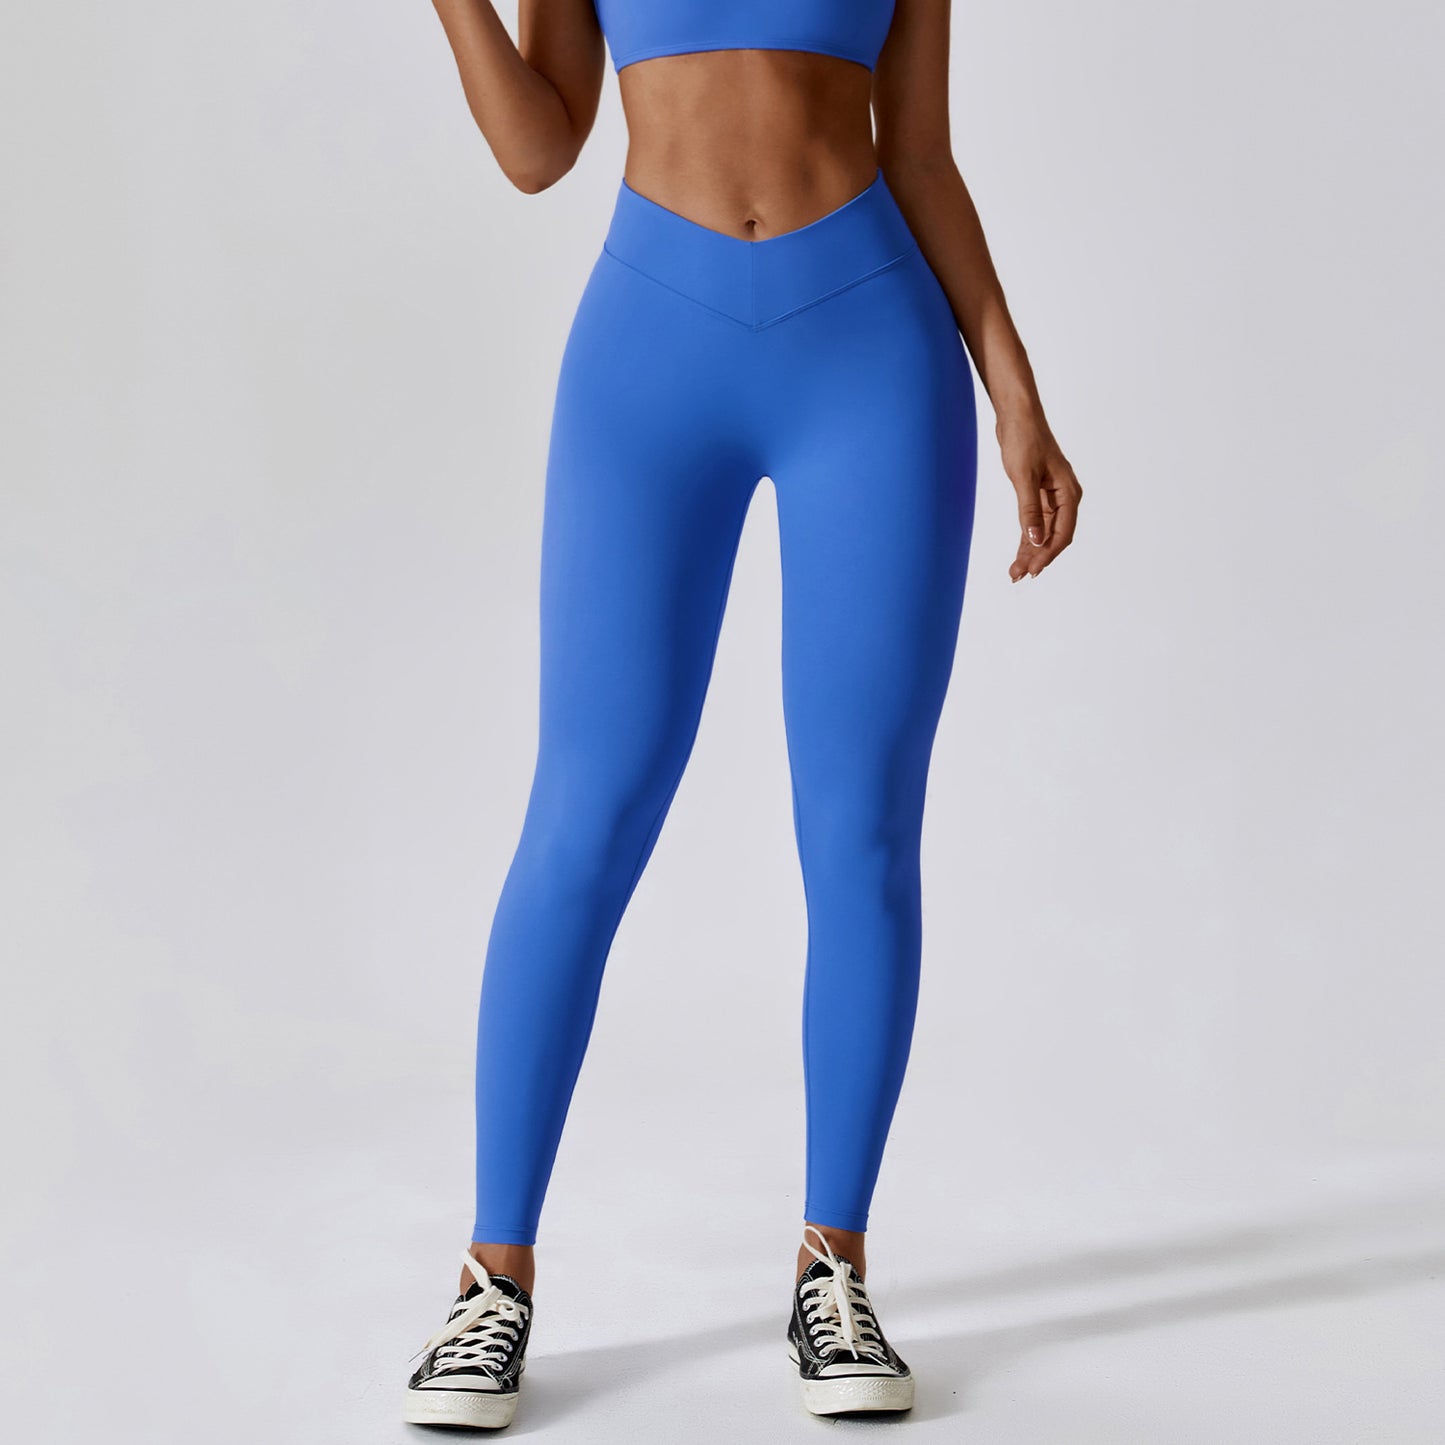 Yoga Pants Quick-Drying Workout Running Pants Outer Wear Skinny Workout Pants